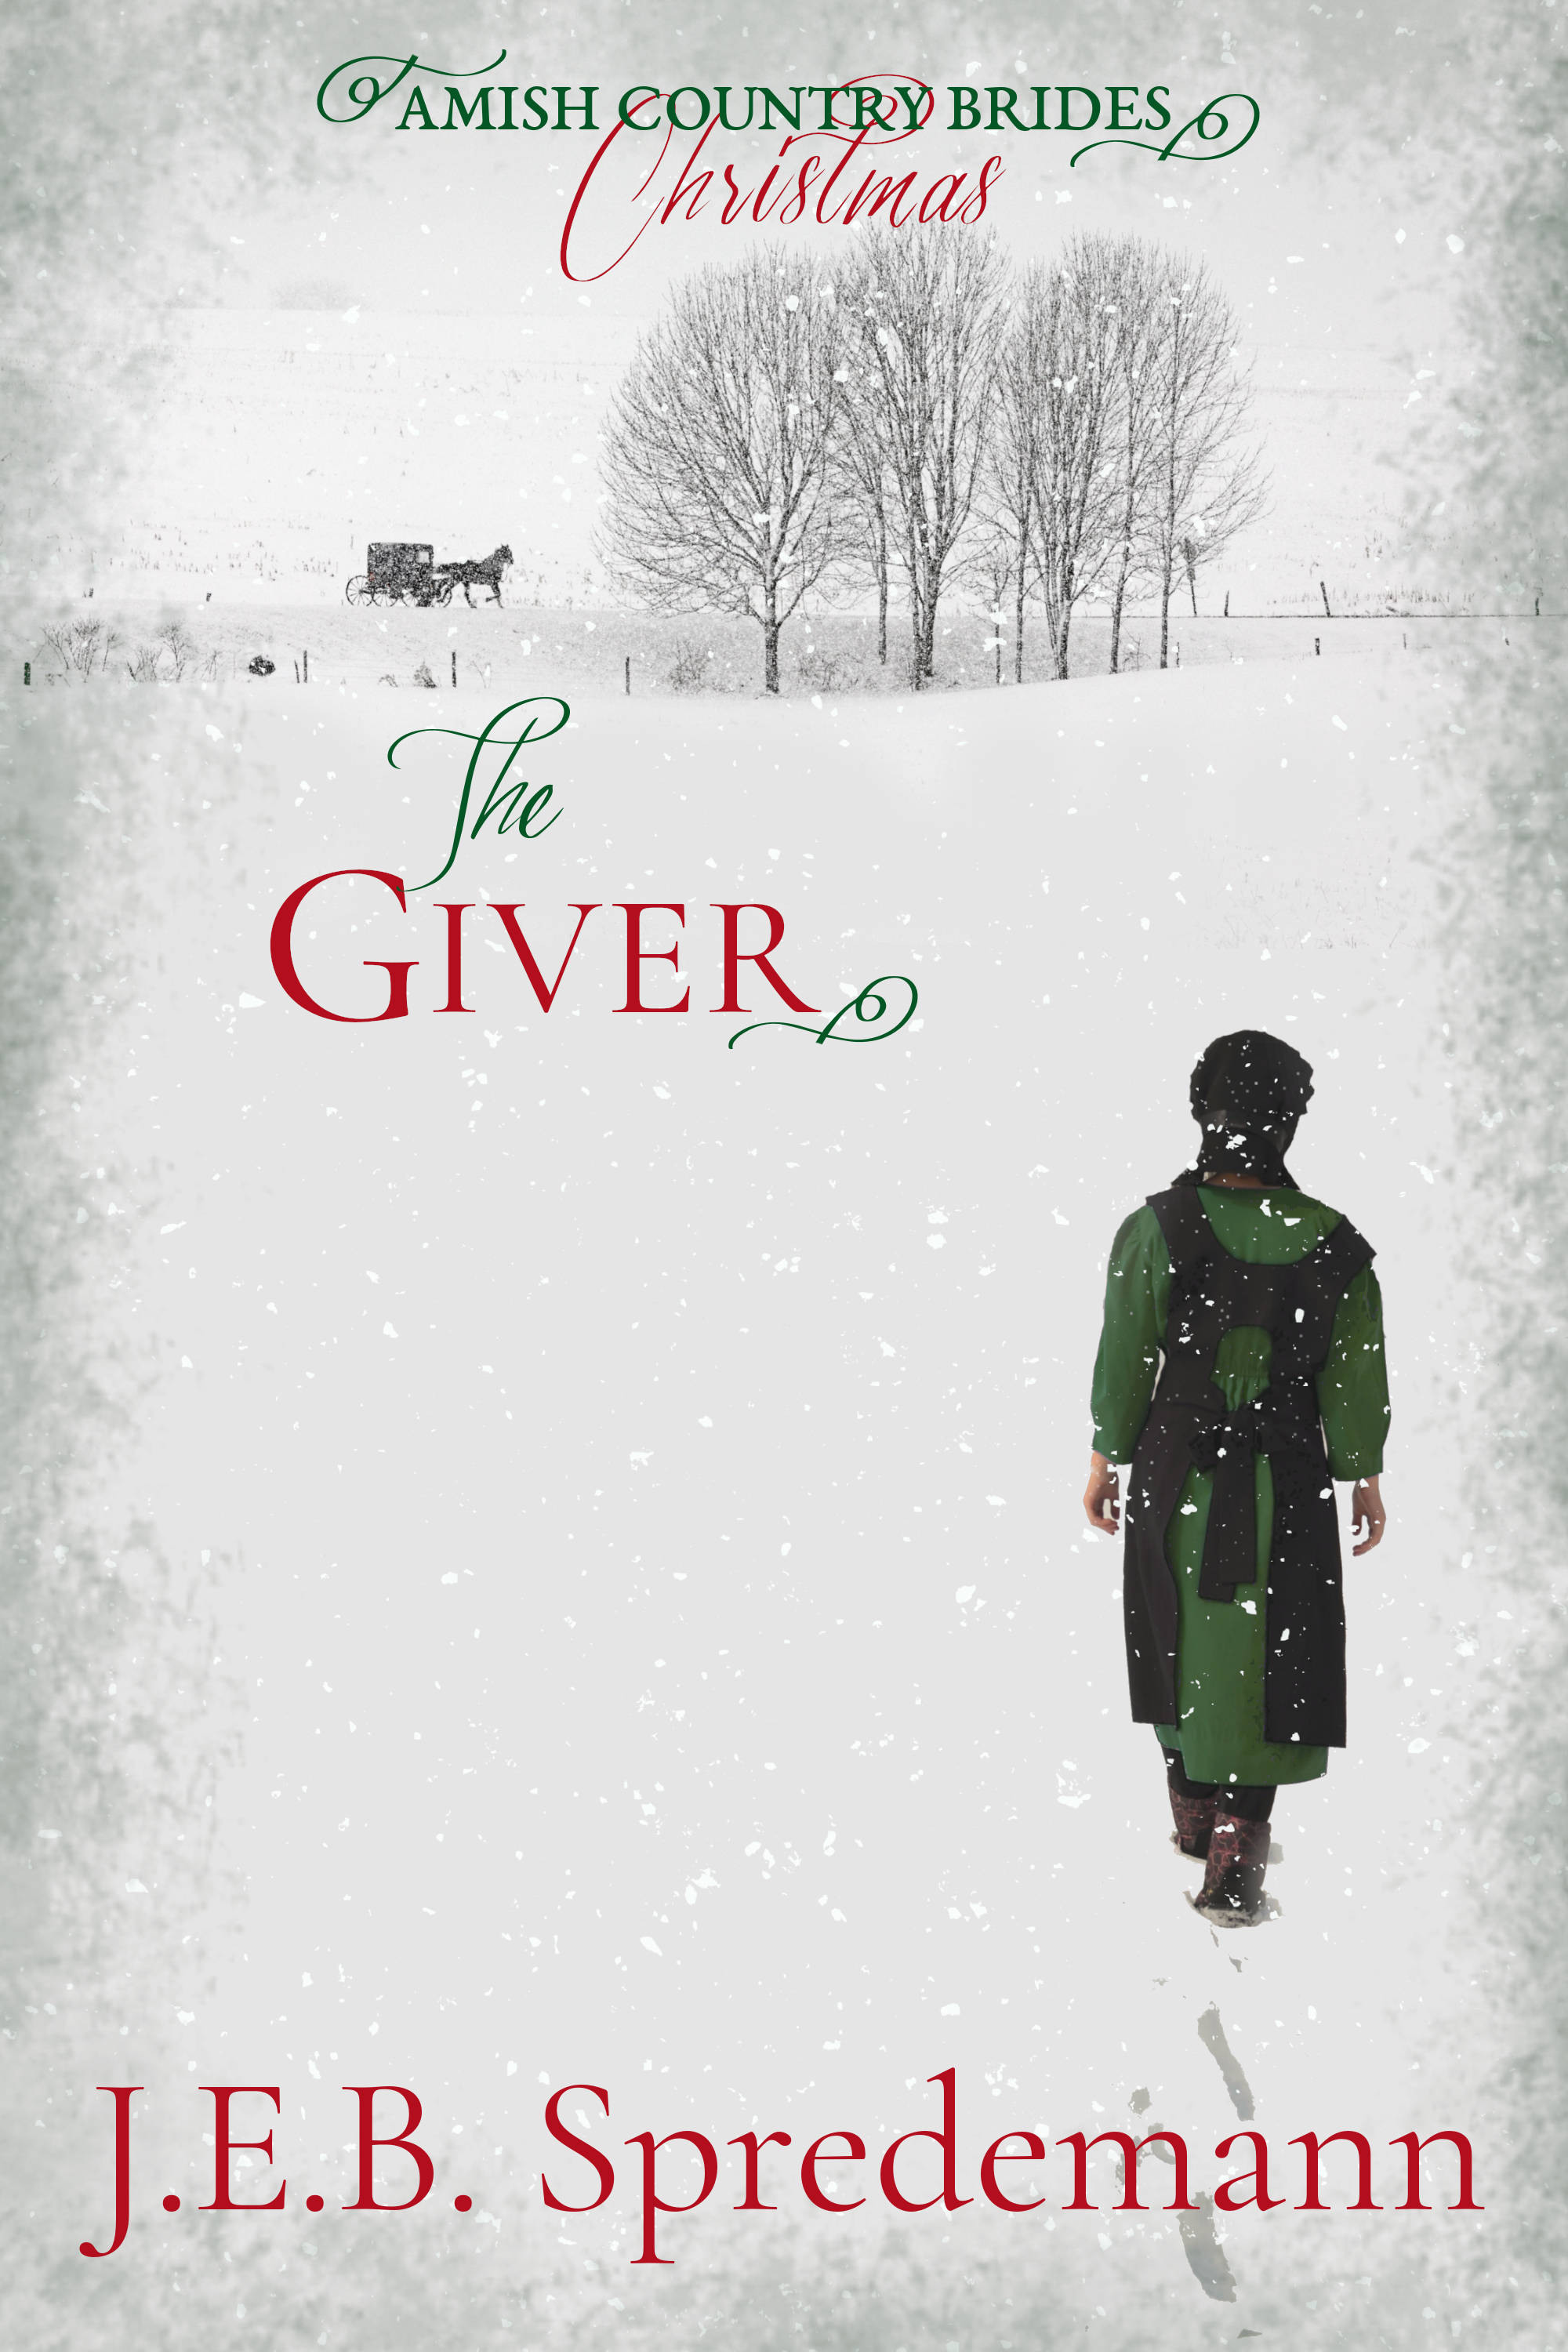 Cover image for The Giver (Amish Country Brides) Christmas [electronic resource] :